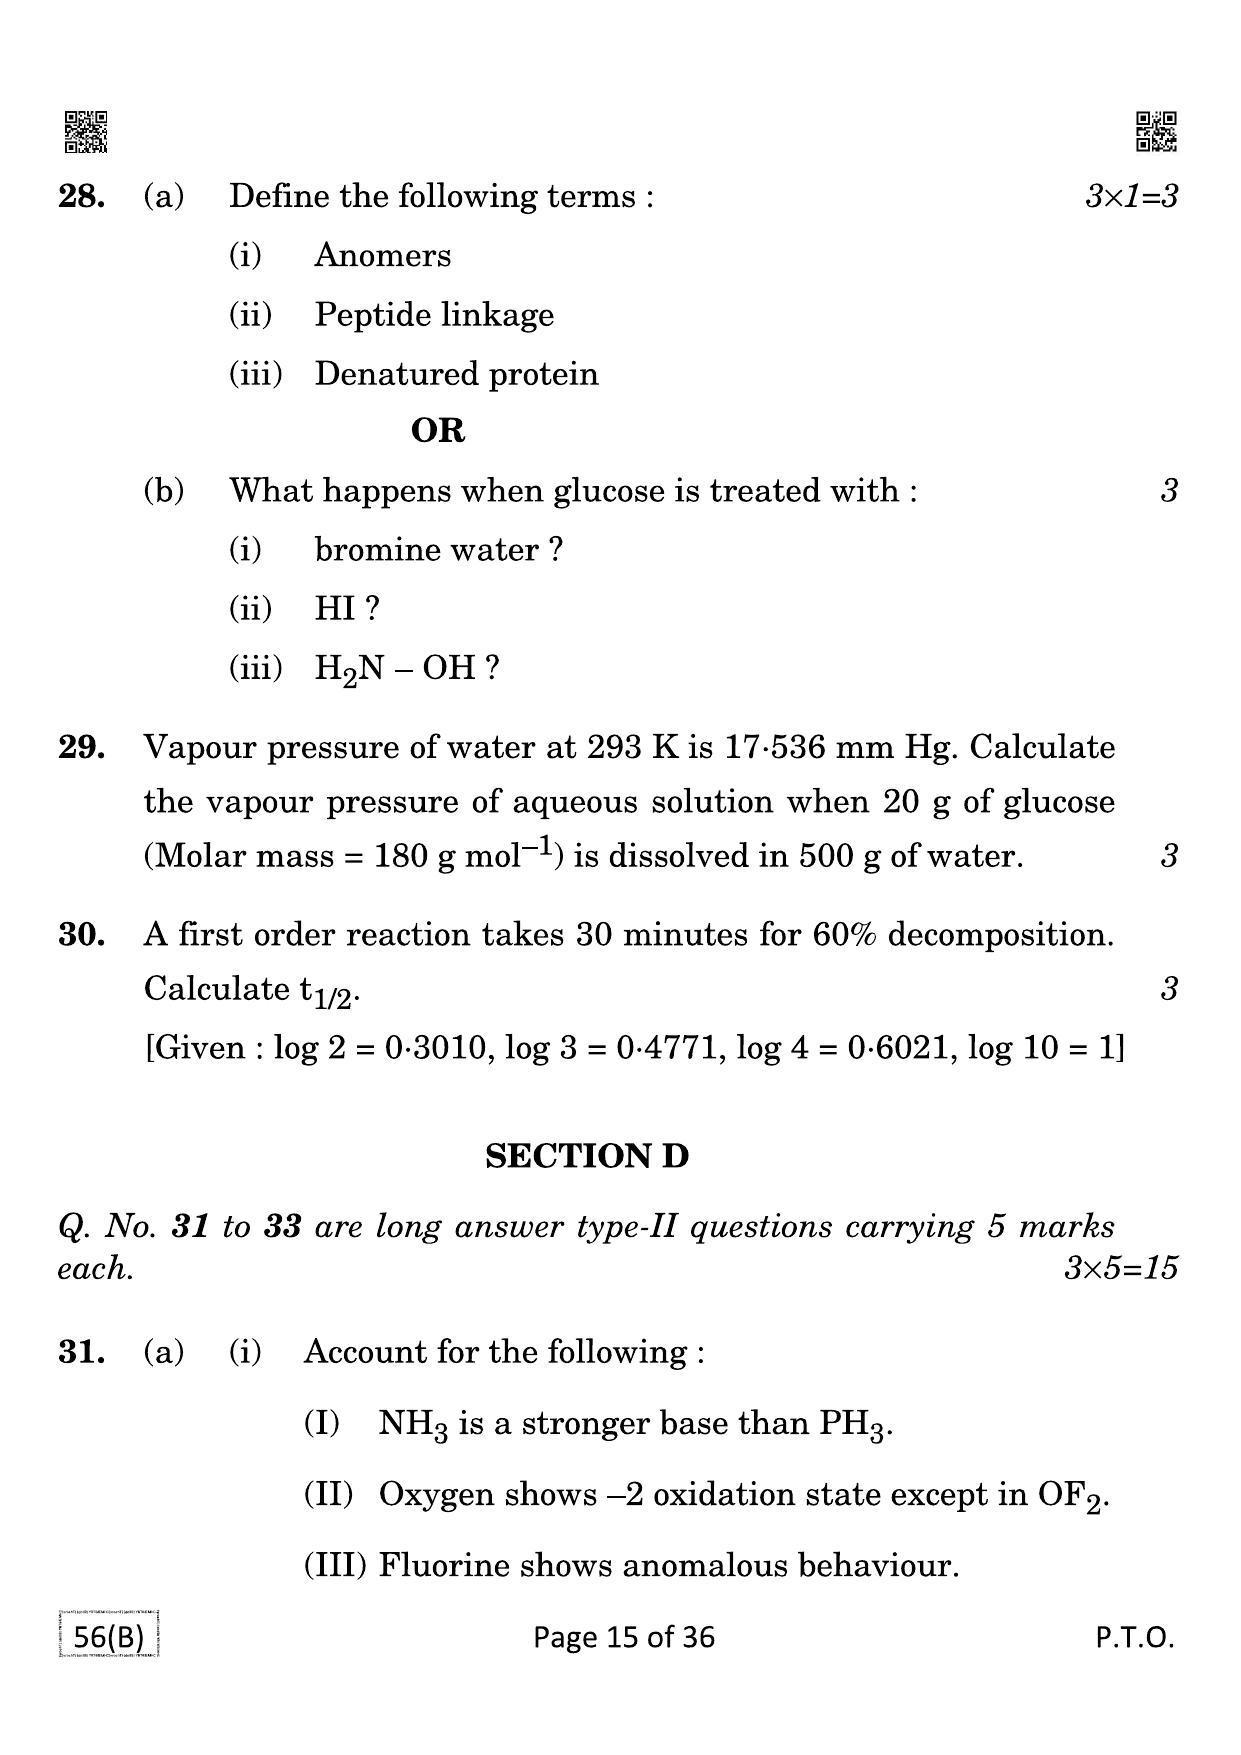 CBSE Class 12 QP_043_CHEMISTRY_FOR_BLIND_CANDIDATES 2021 Compartment Question Paper - Page 15